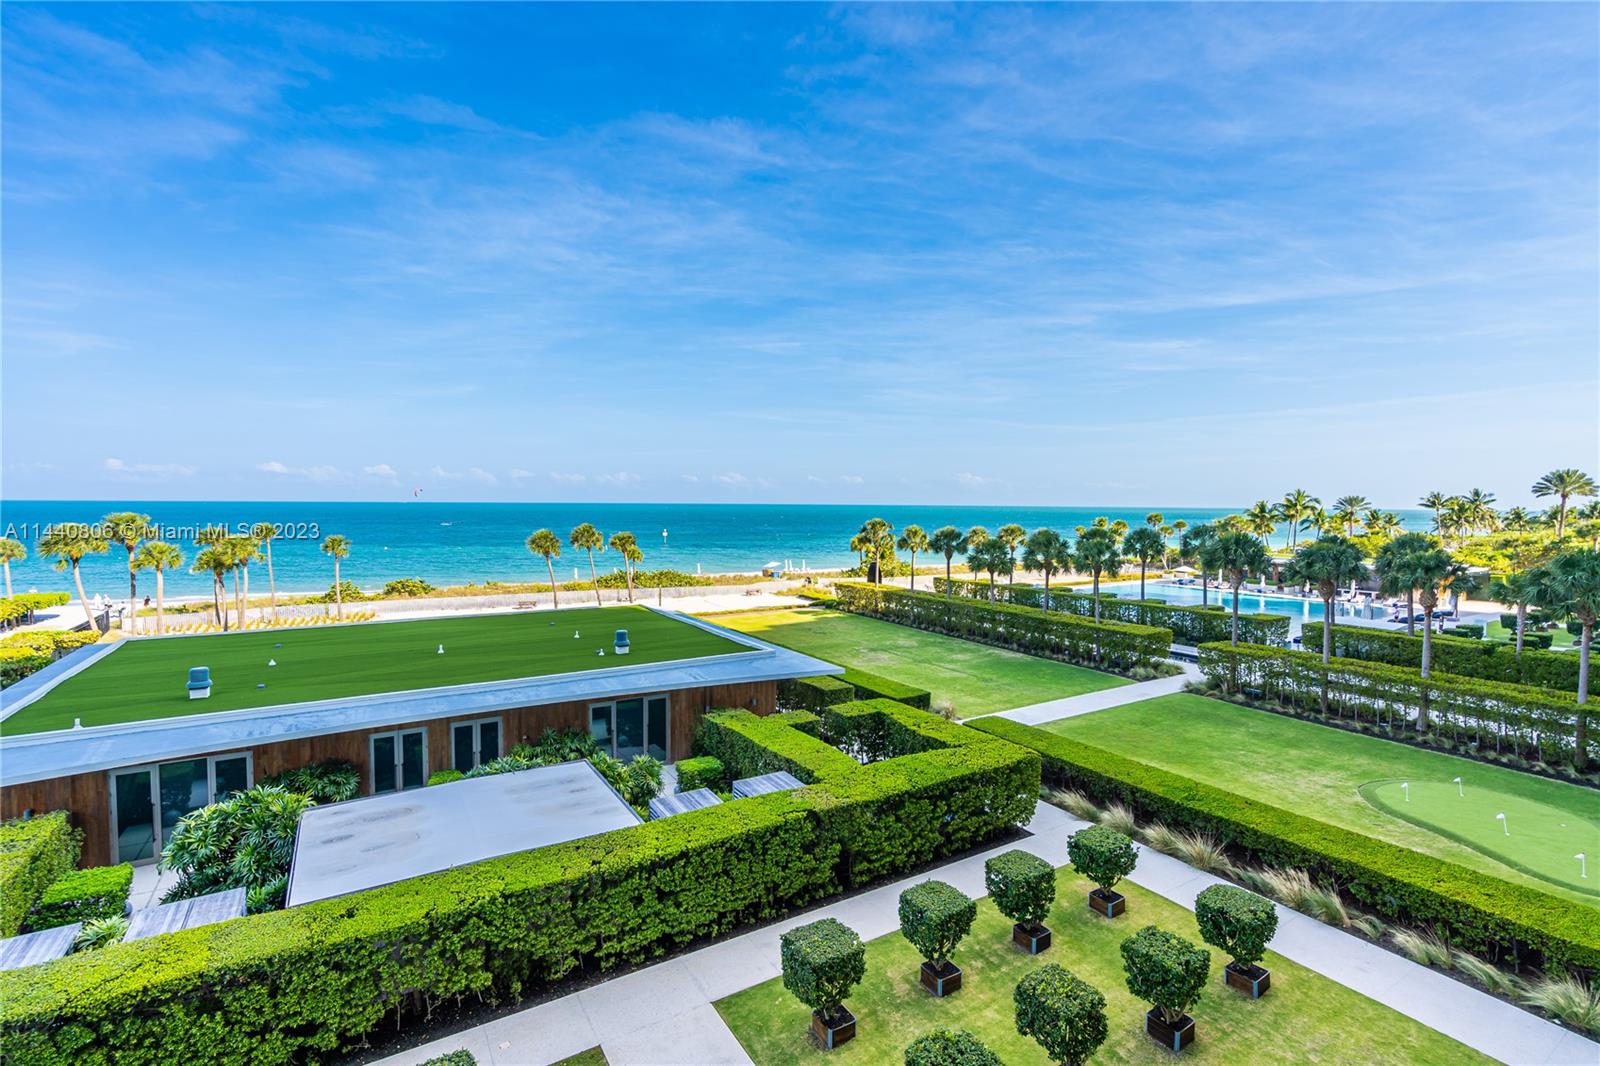 One of a kind world class OCEANA is located directly 400 linear feet of Atlantic beachfront. Invest or live in the most luxurious building in Key Biscayne offering modern architecture and design. This amazing NORTH corner unit has 3 bedrooms, a service room, 6 baths, large laundry room and a huge wrap around balcony. Kitchen with white quartz countertops, master chef double oven, coffee system and wine cooler. The unit has a private elevator foyer with a split bedroom floor plan. Enjoy the beach, pool, lap pool, beach volleyball, tennis court, biking, spa, gym, full service bldg, and a Mediterranean beach restaurant will full service to the apartments. Business center and media room available for work meetings. Unit has been converted into 3 BIG suites, plus a service room with full bath.